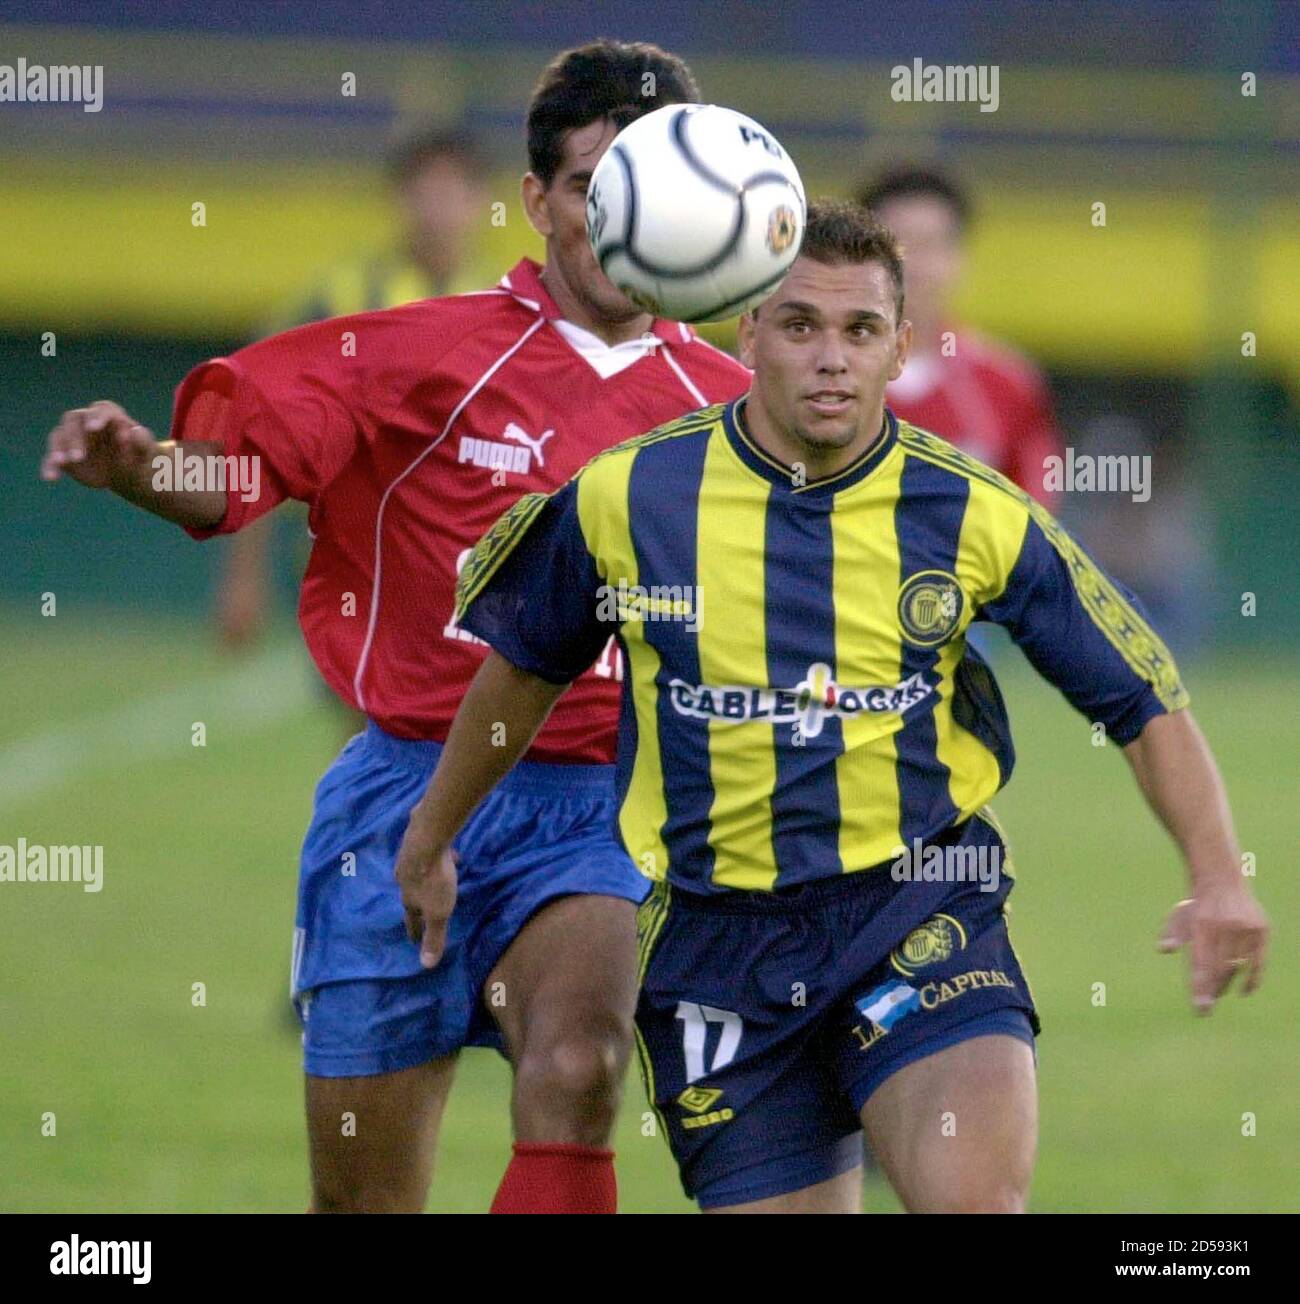 Federico Arias, of the Argentine soccer club Rosario Central, goes for the  ball followed by Paraguayan